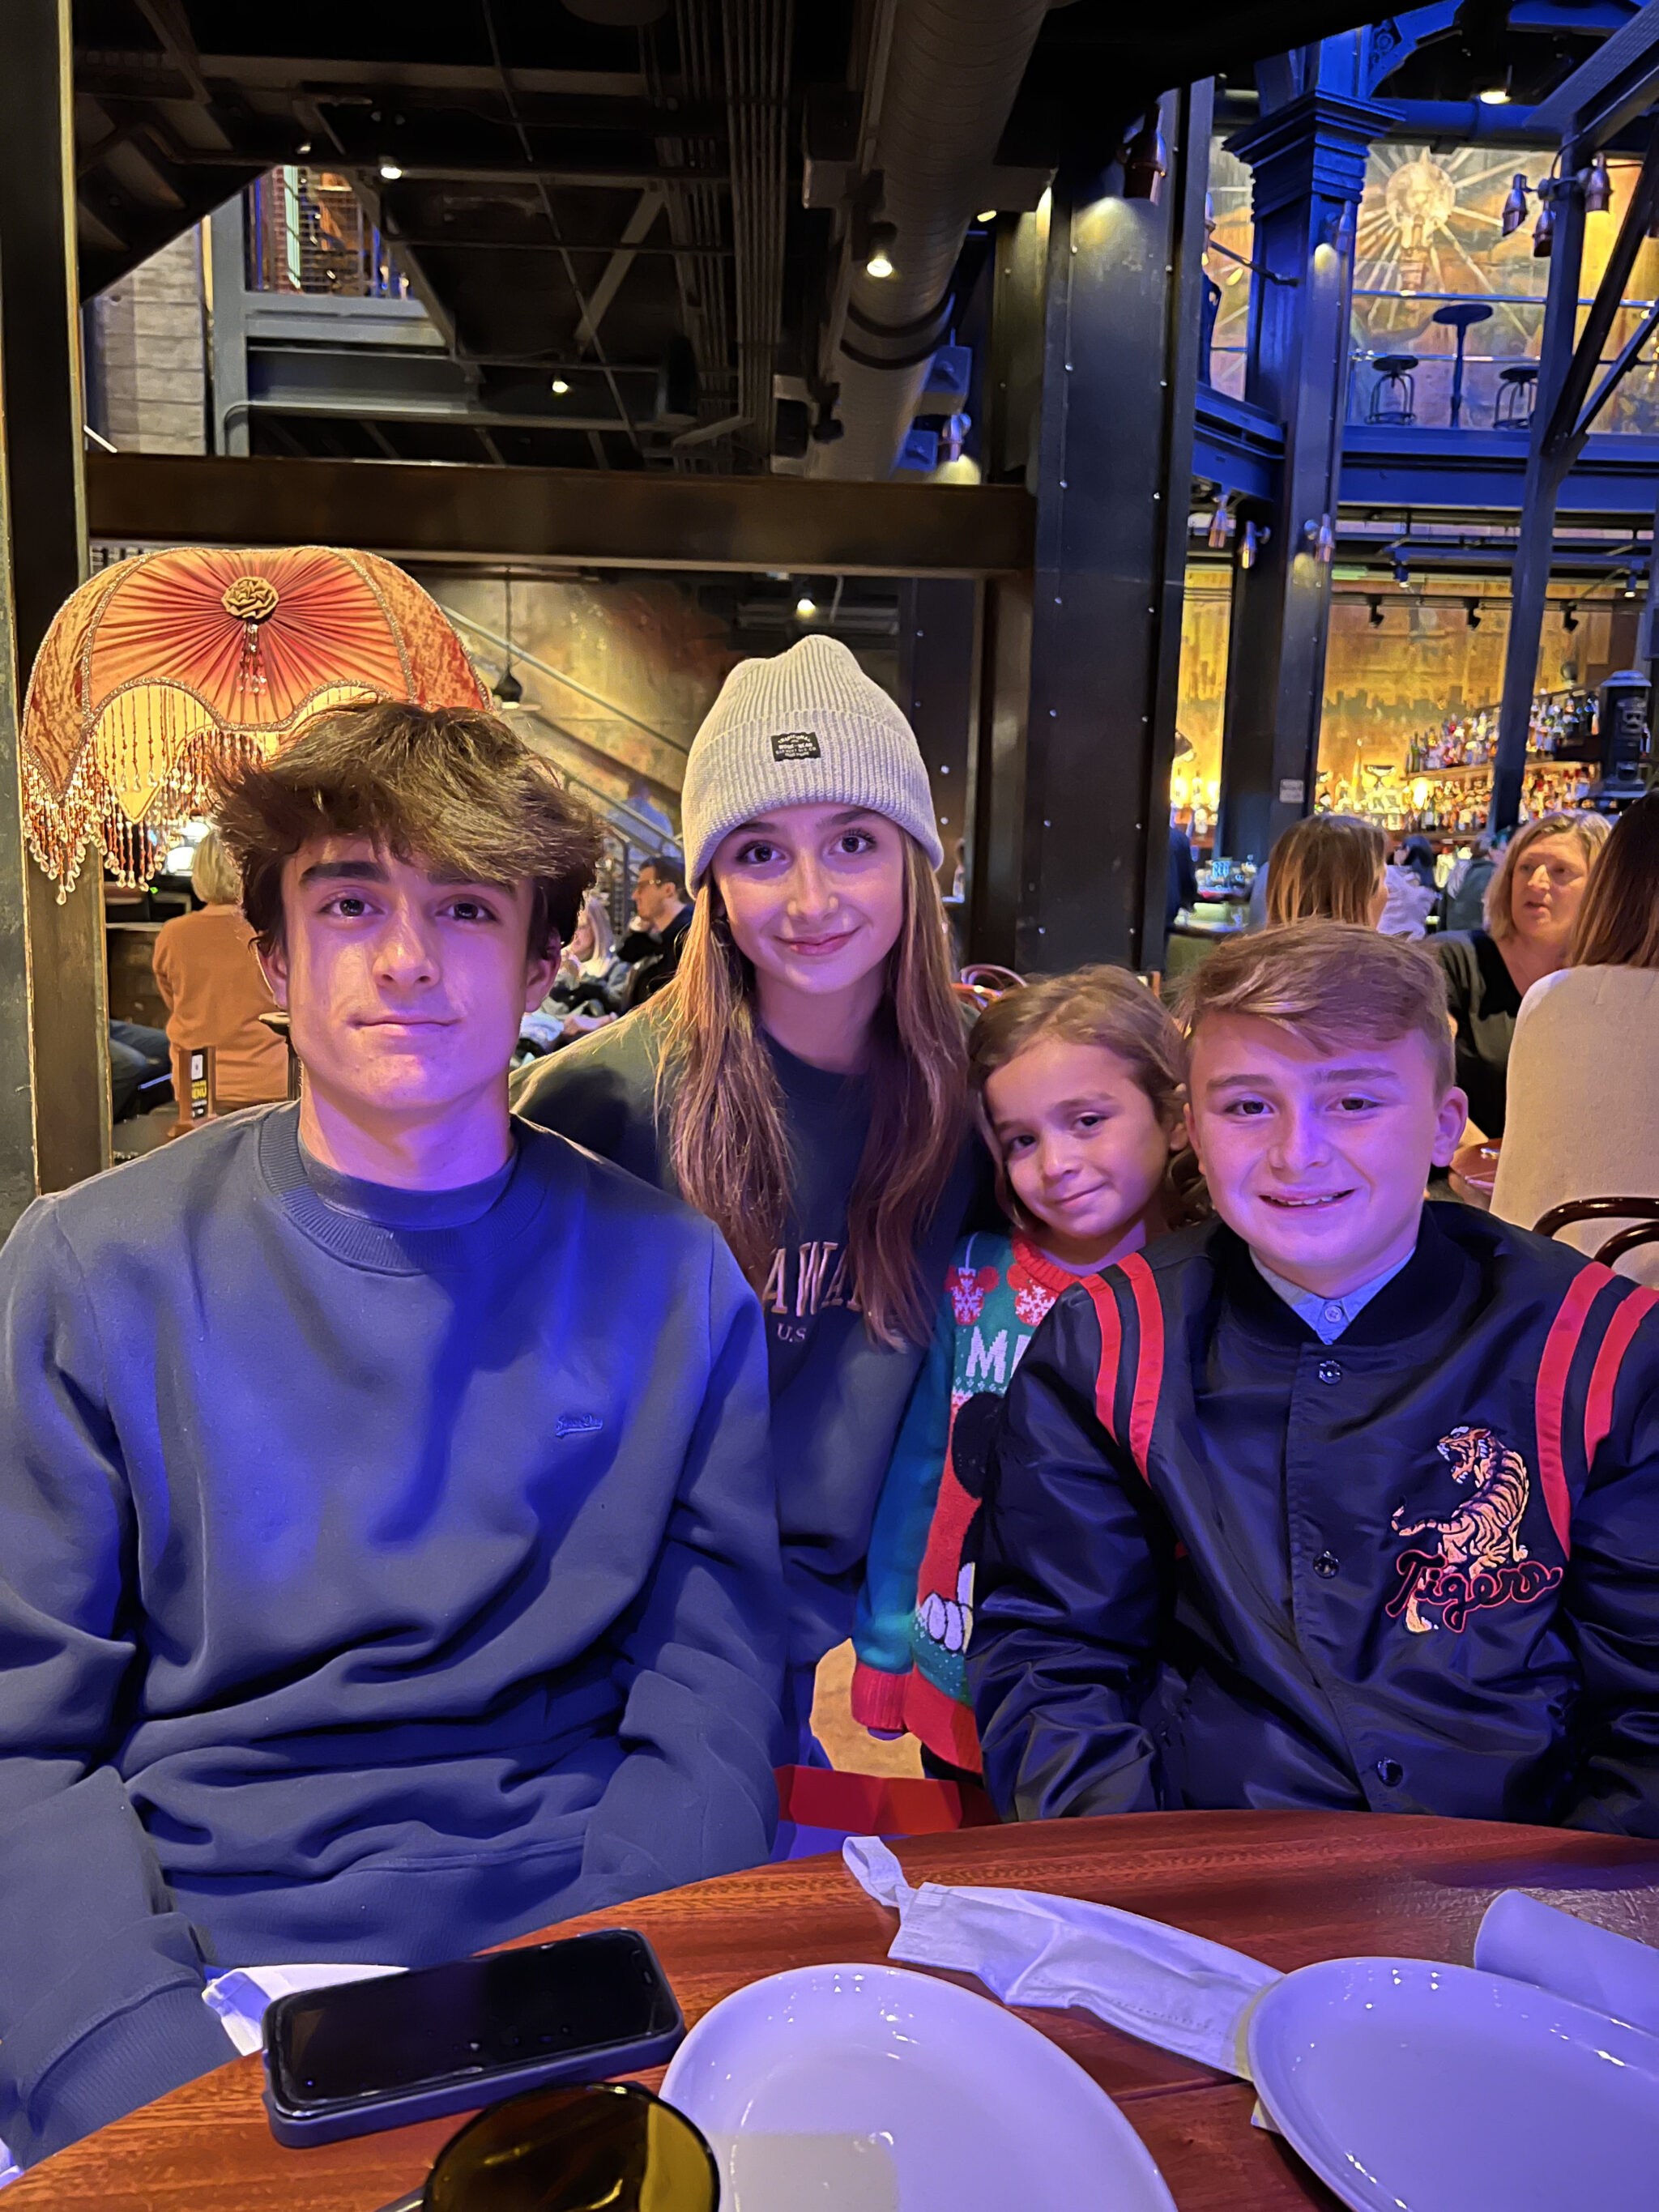 siblings sitting together in a restaurant